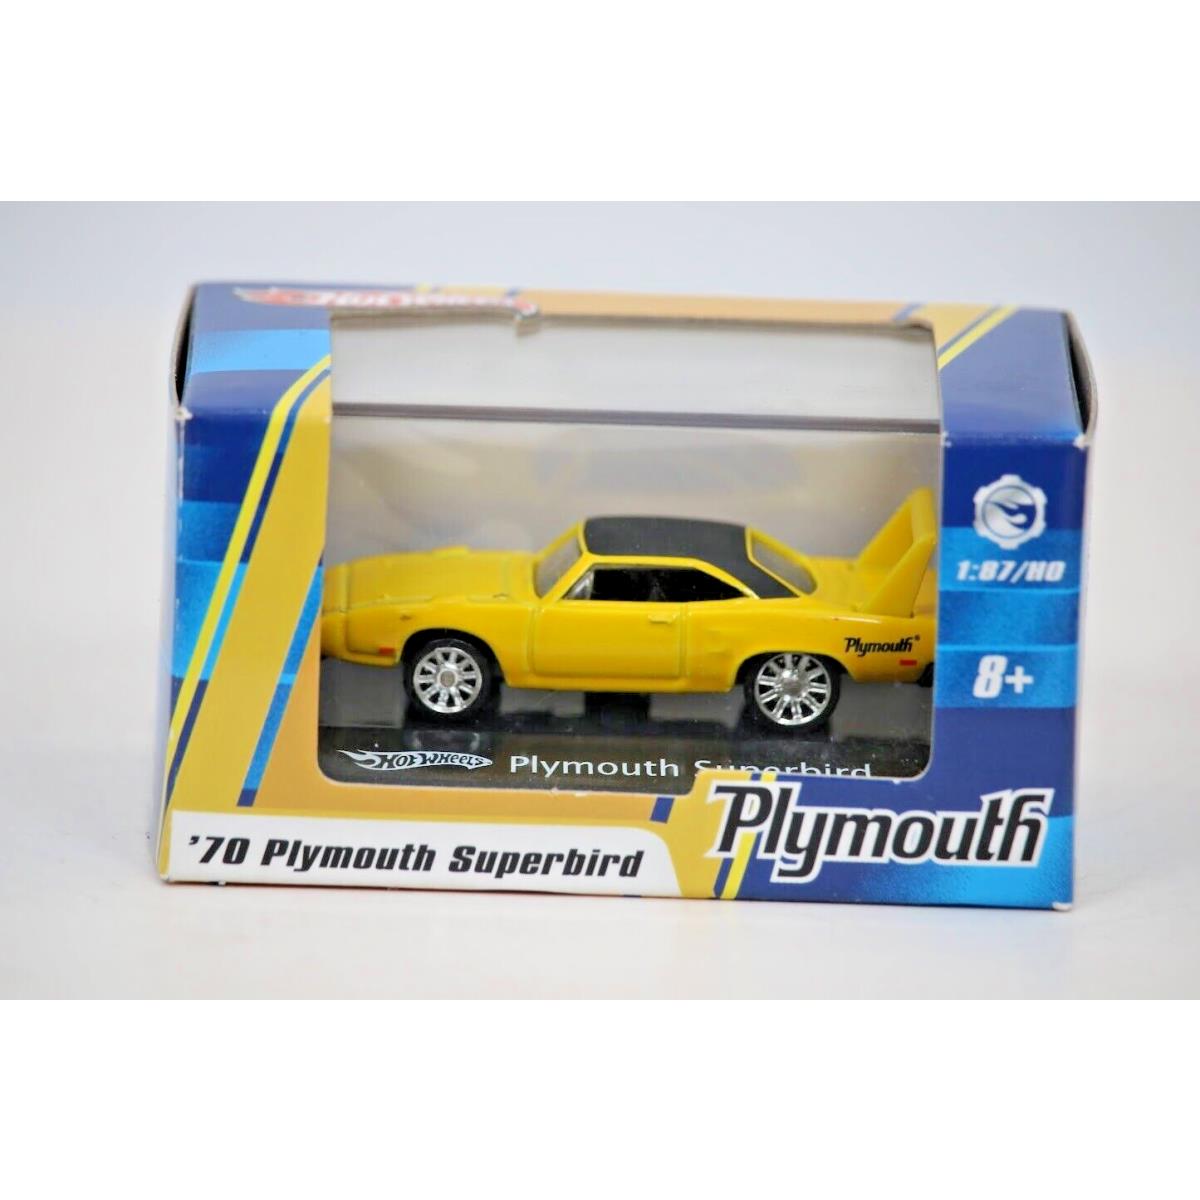 `70 Plymouth Superbird - Hot Wheels 1:87 Scale